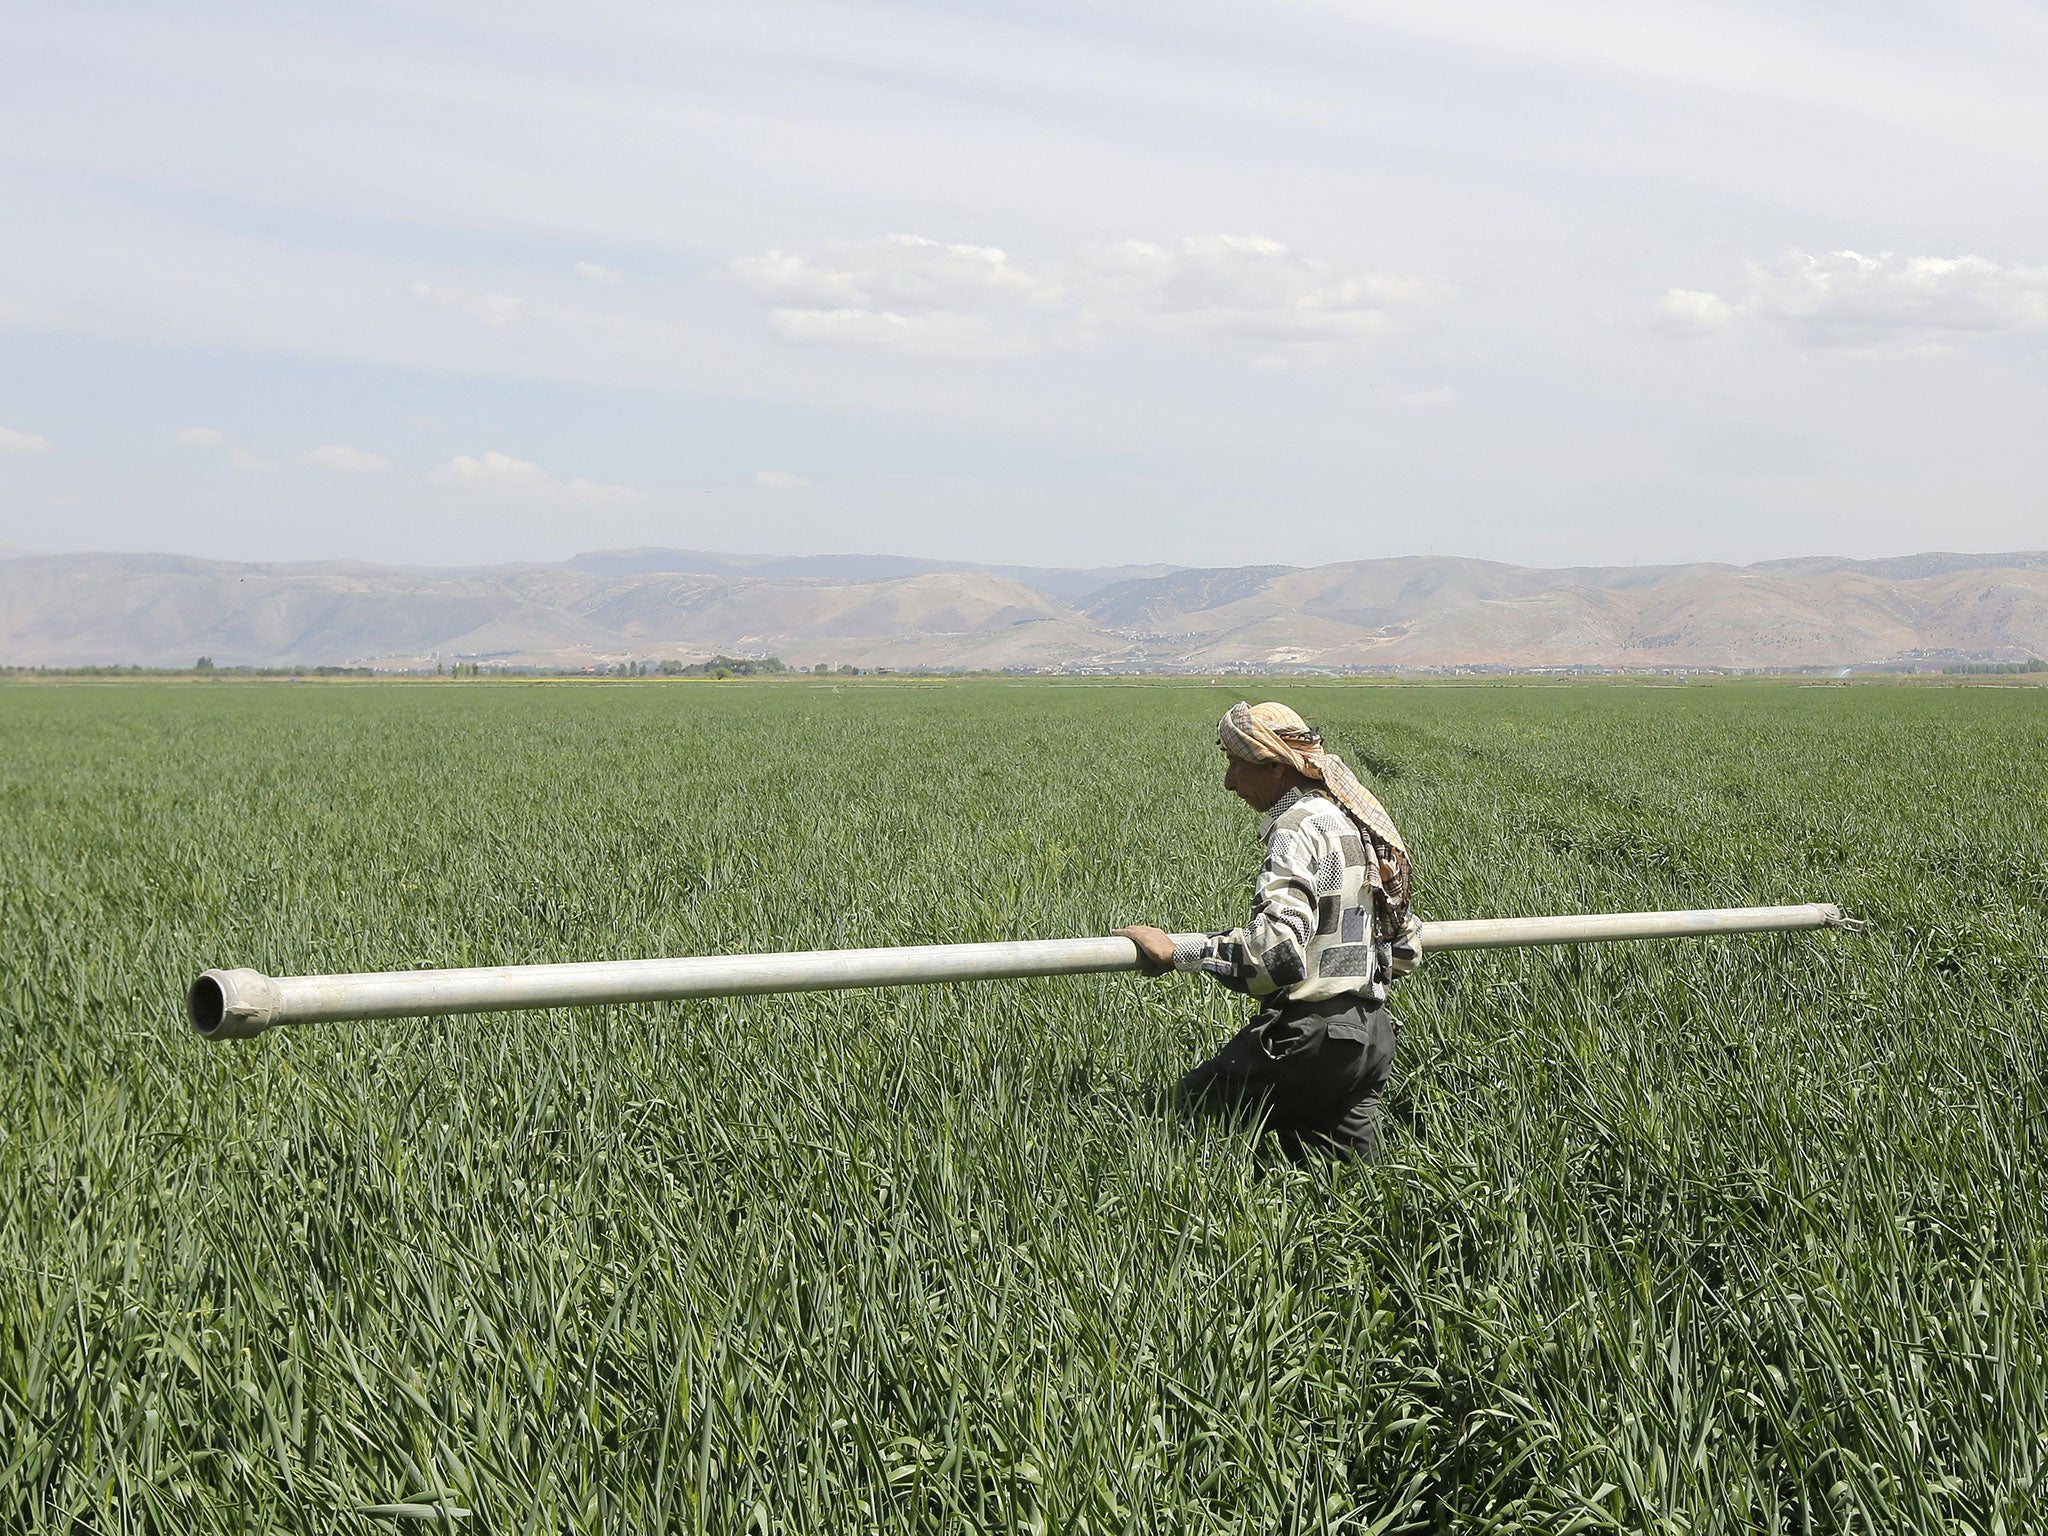 A Lebanese farmer installs water tubes as he prepares to irrigate his malt field in the Ammiq wetland in the Bekaa valley